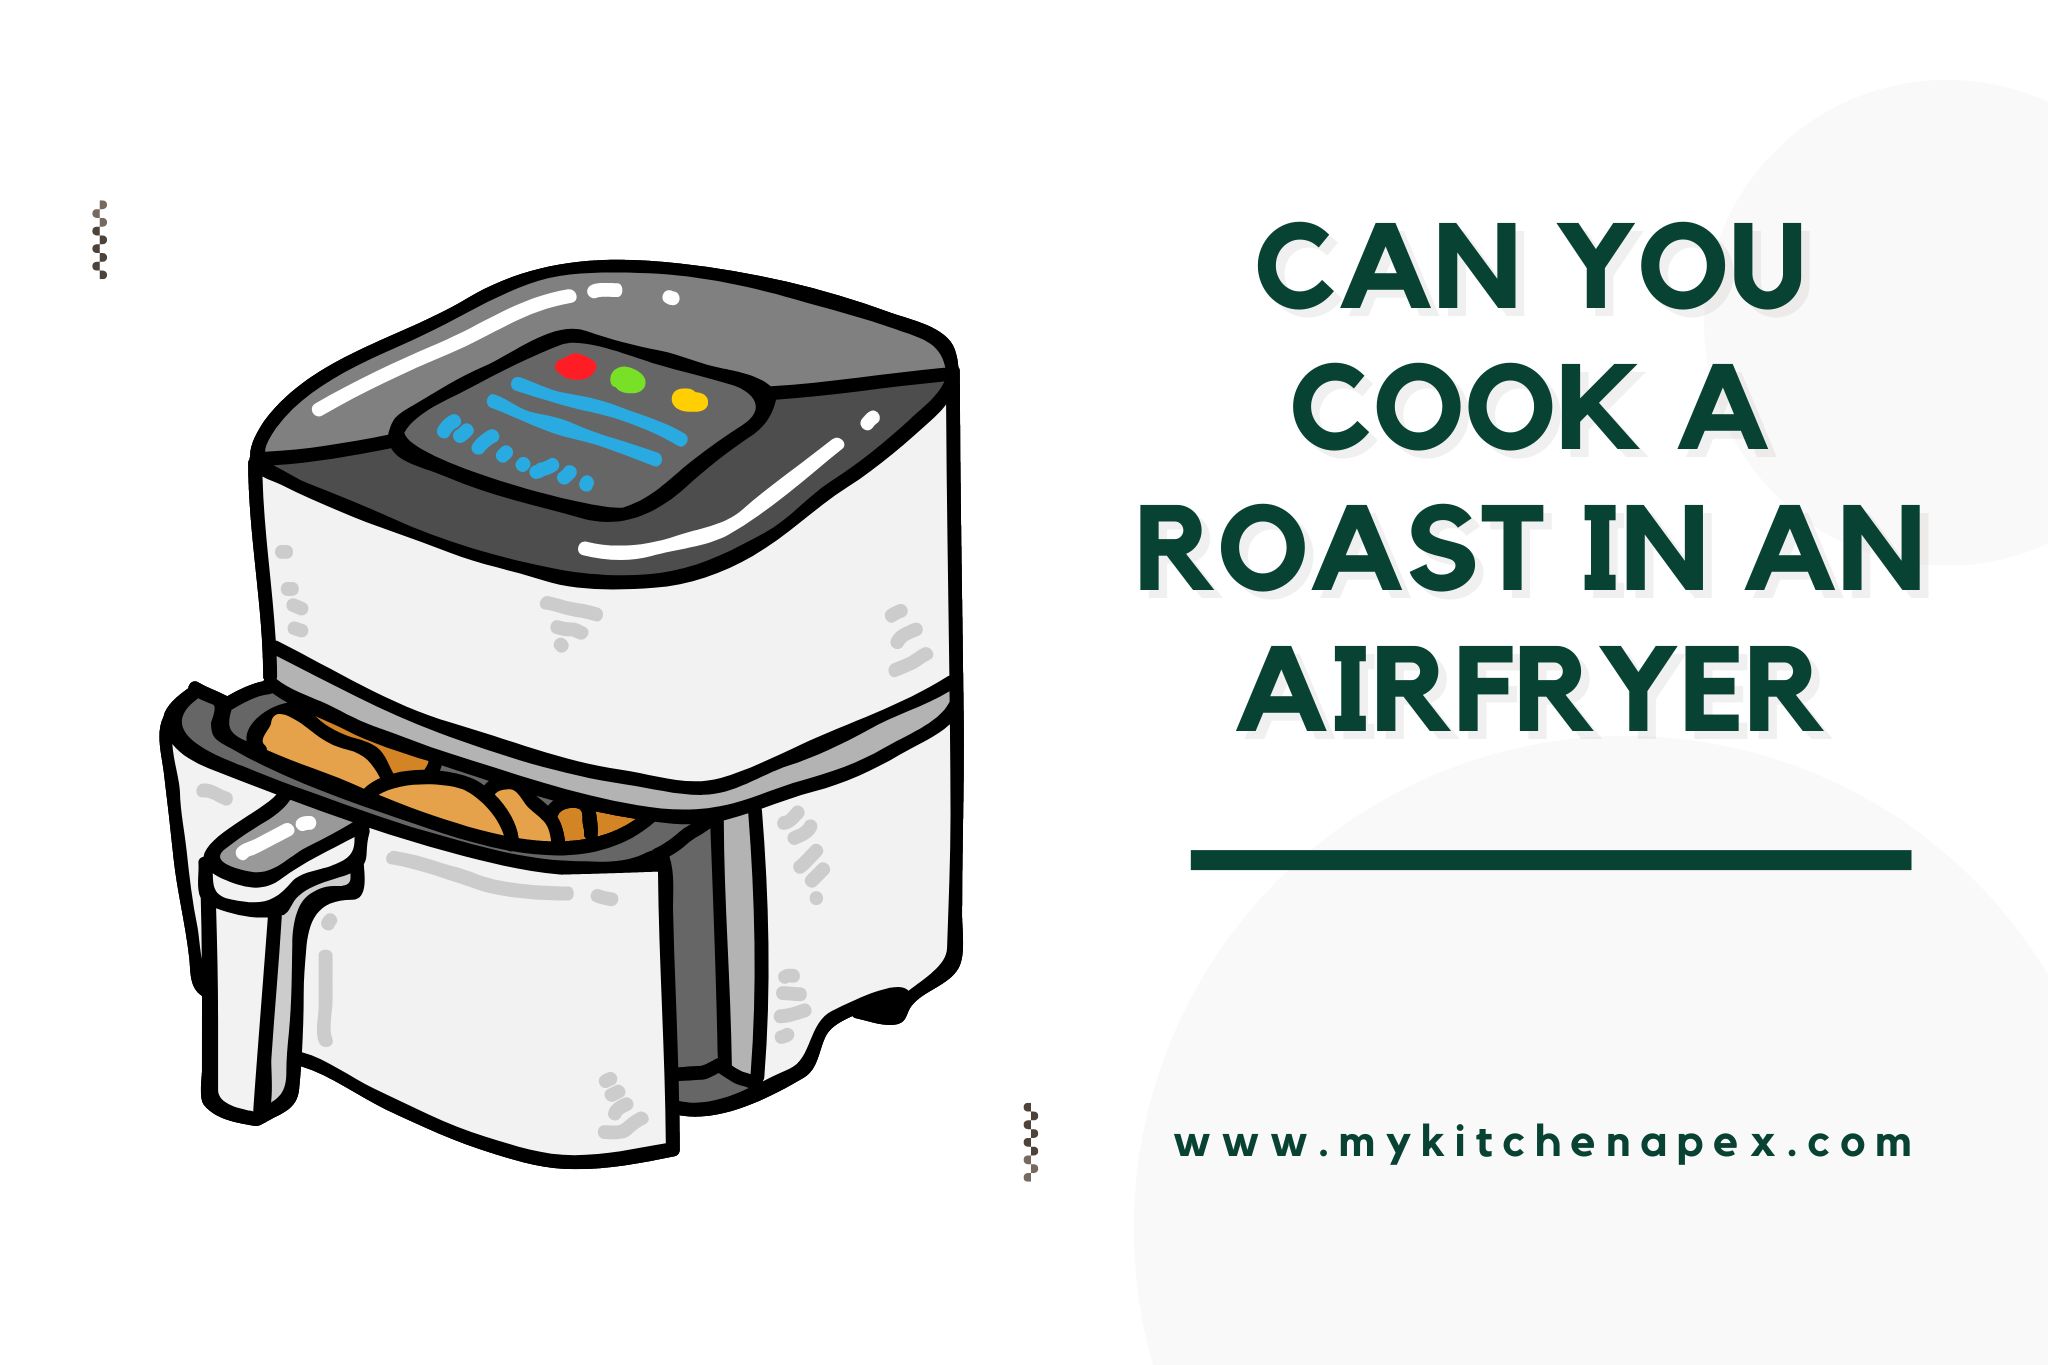 can you cook a roast in an airfryer